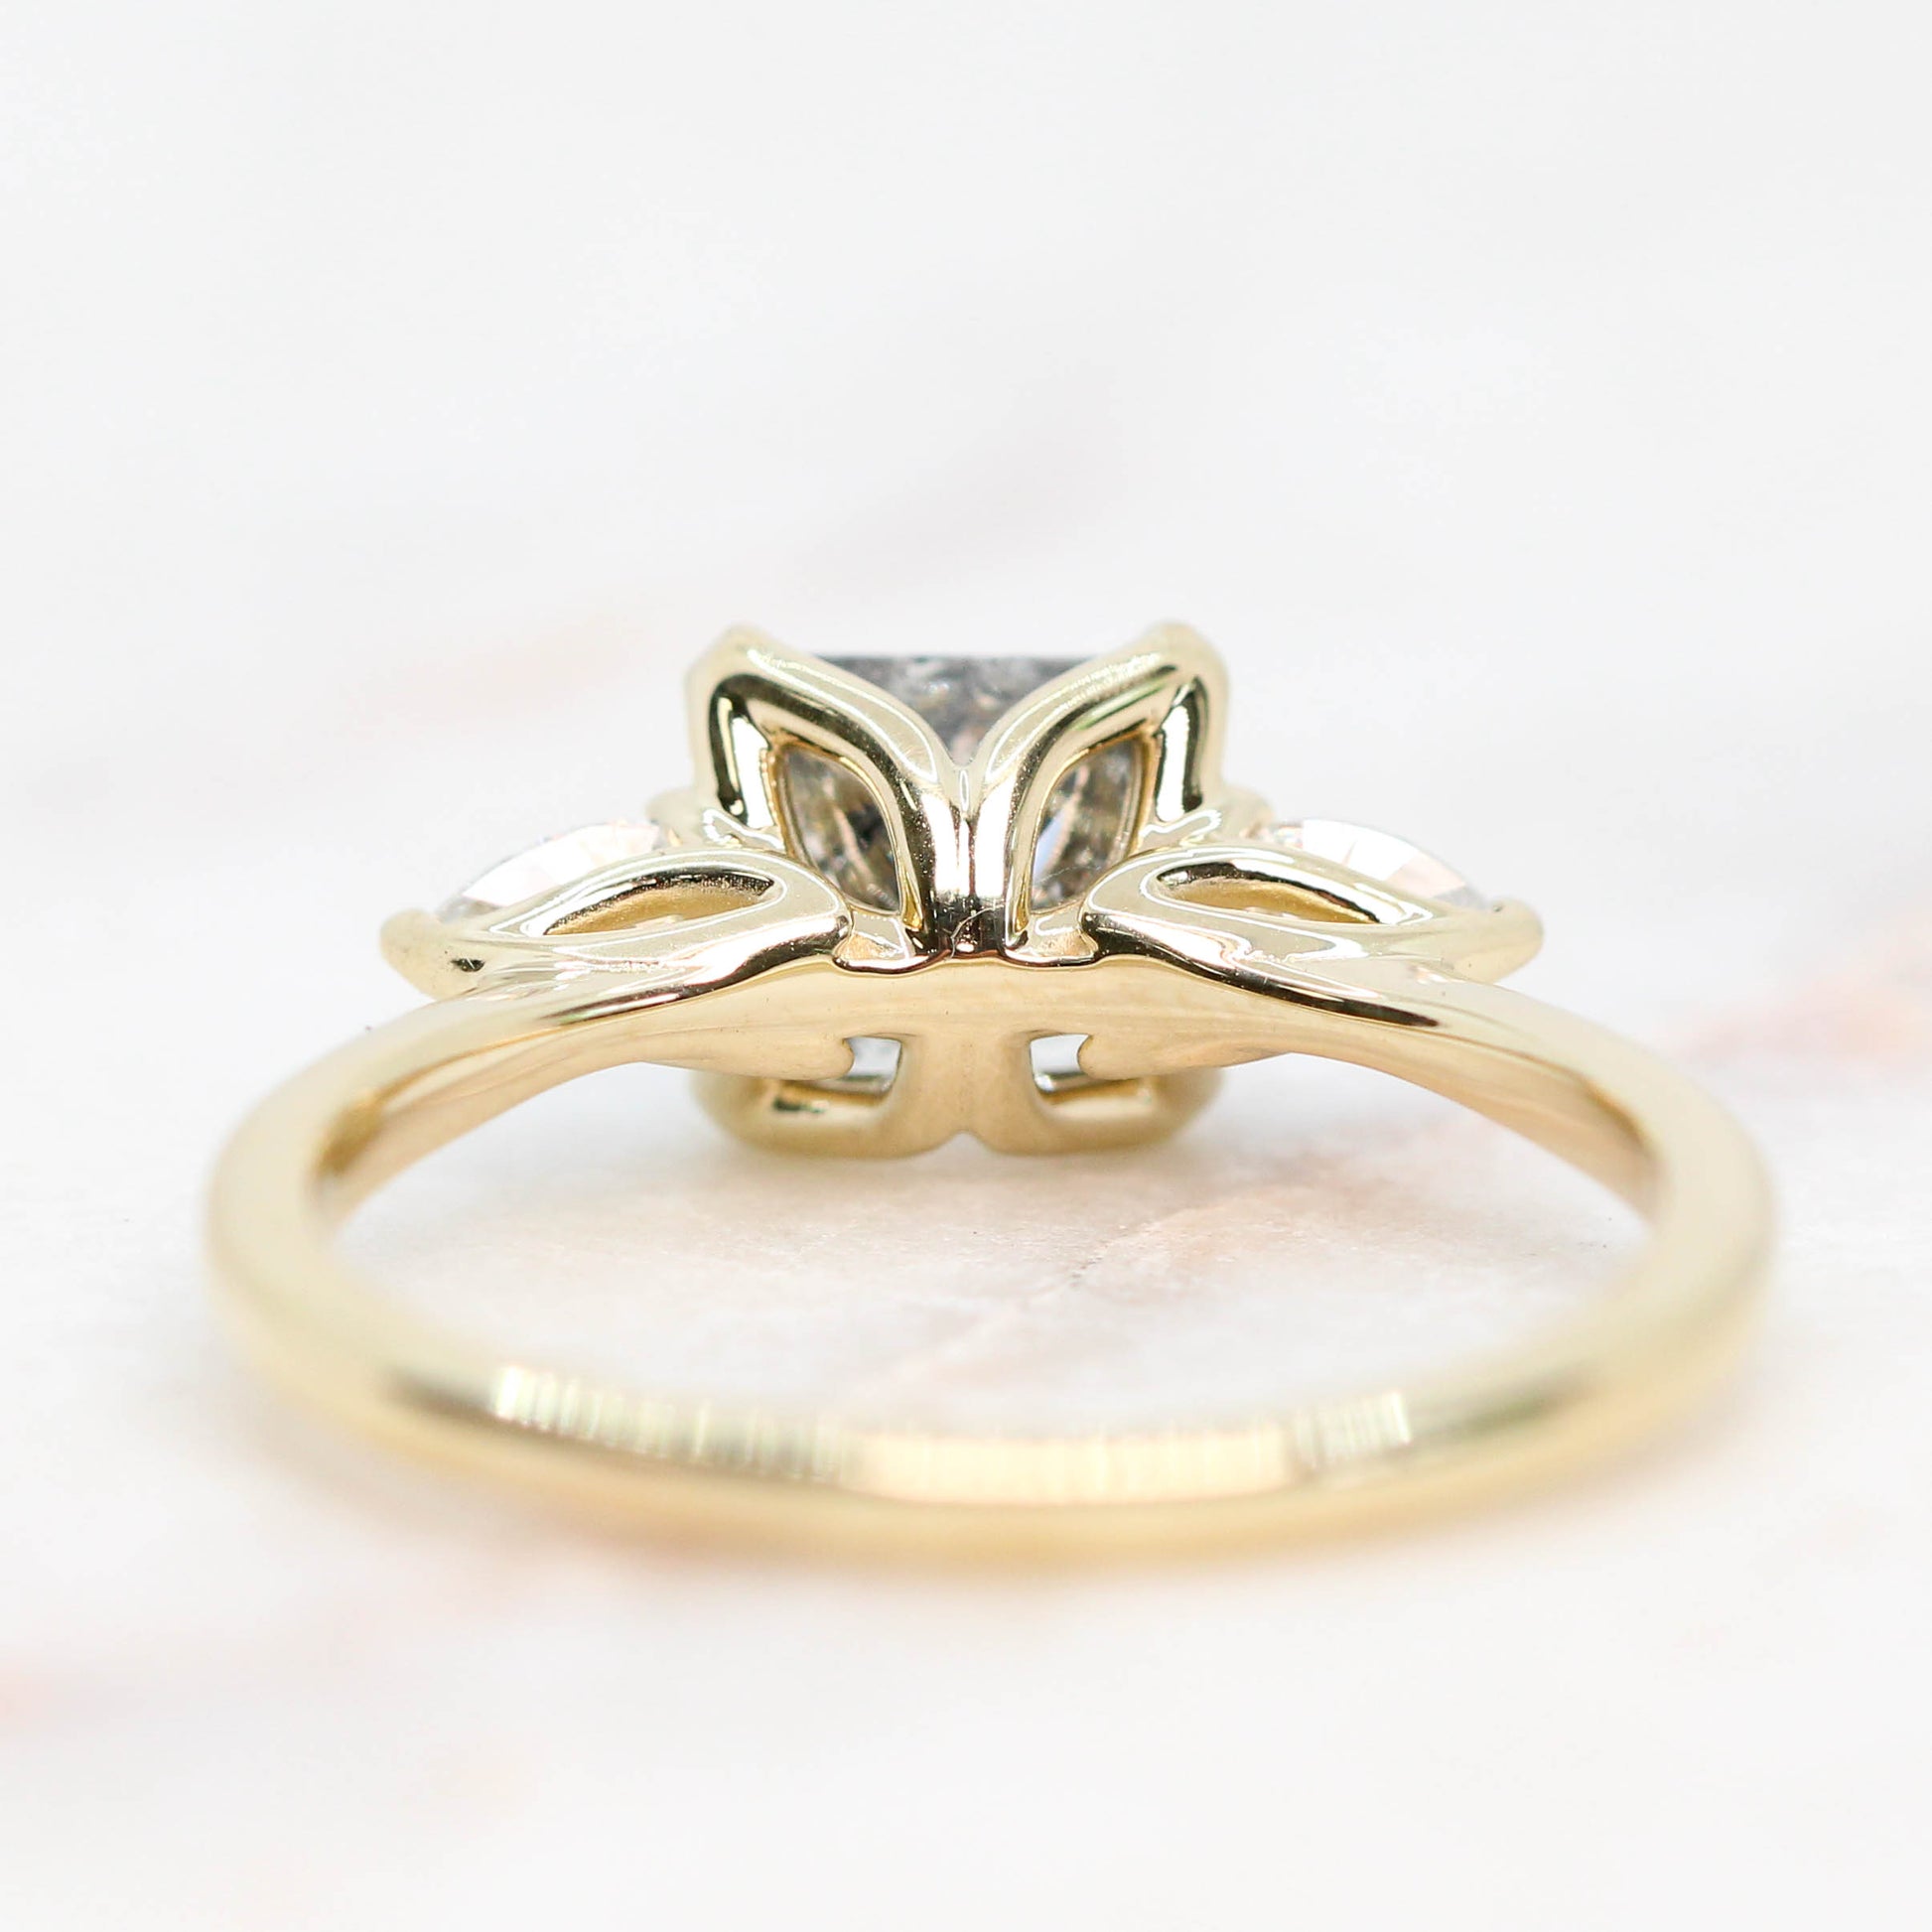 Oleander Ring with a 1.35 Carat Gray Celestial Princess Cut Diamond and White Accent Diamonds in 14k Yellow Gold - Ready to Size and Ship - Midwinter Co. Alternative Bridal Rings and Modern Fine Jewelry